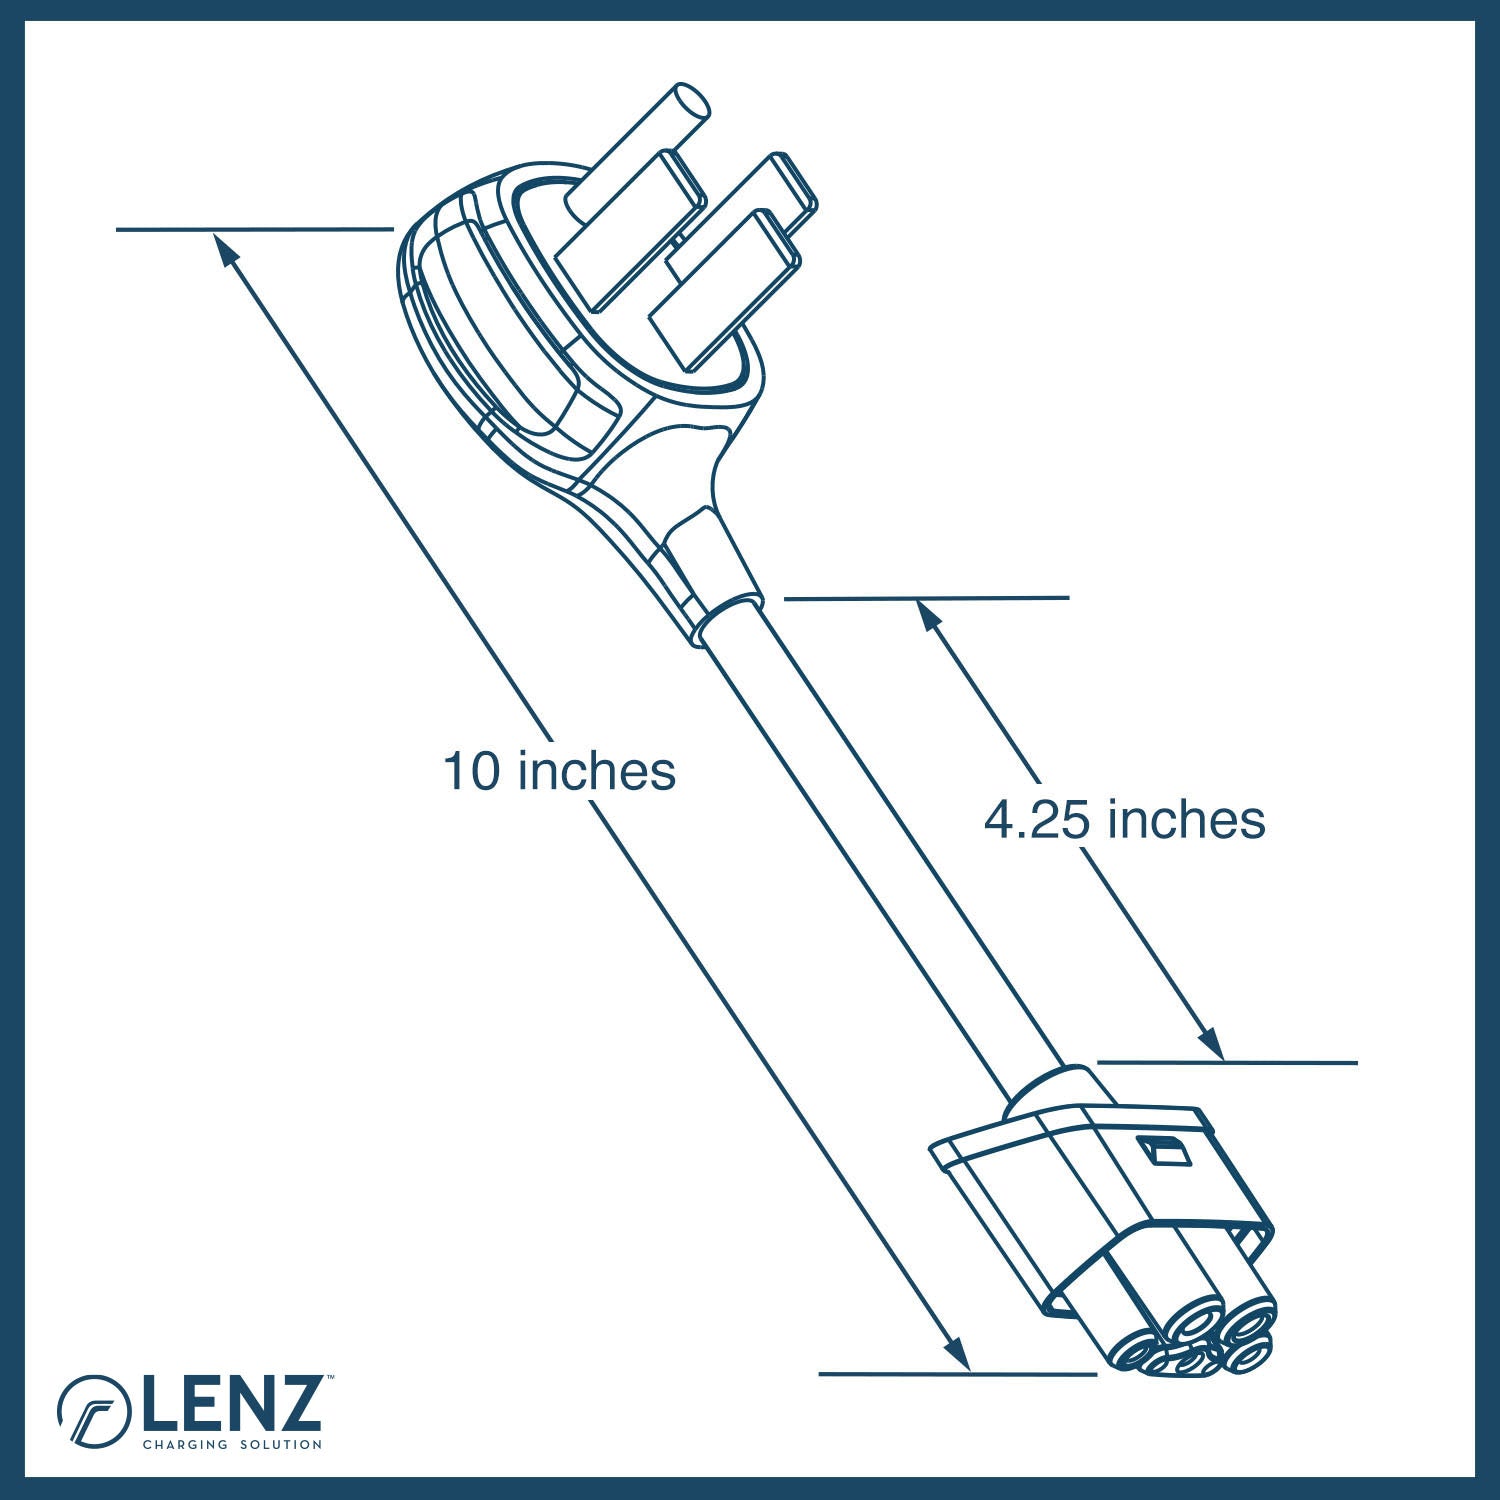 LENZ NEMA 14-50 Adapter for Tesla Gen 2 Mobile Connector Measures 10 inches end-to-end. A longer 15.7 inch extended version is available. 